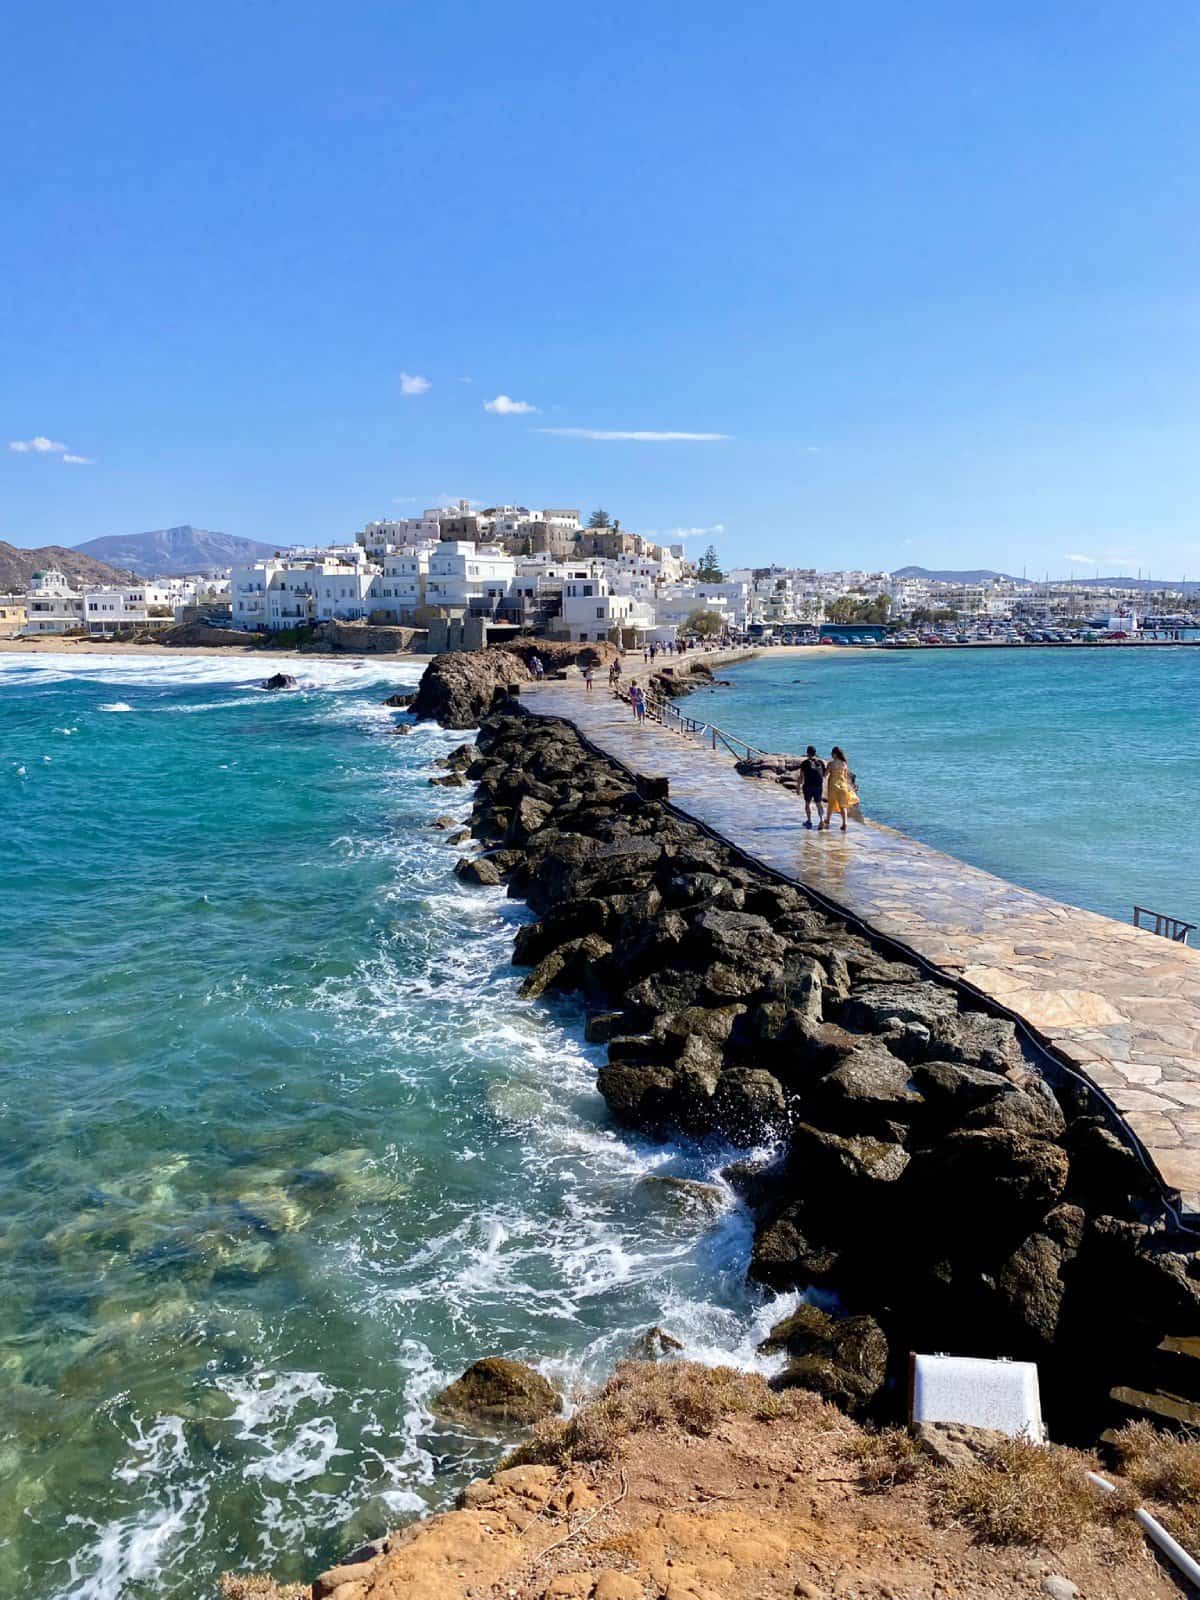 What to Do in Naxos Town | The main town of the Greek isle of Naxos, called Naxos Chora or Naxos Town, is packed with history, architecture, great food & cocktails, gorgeous ocean views, & more...things to do in Naxos Town, a day or two in Naxos, Cyclades itinerary ideas, Greek island itinerary! 